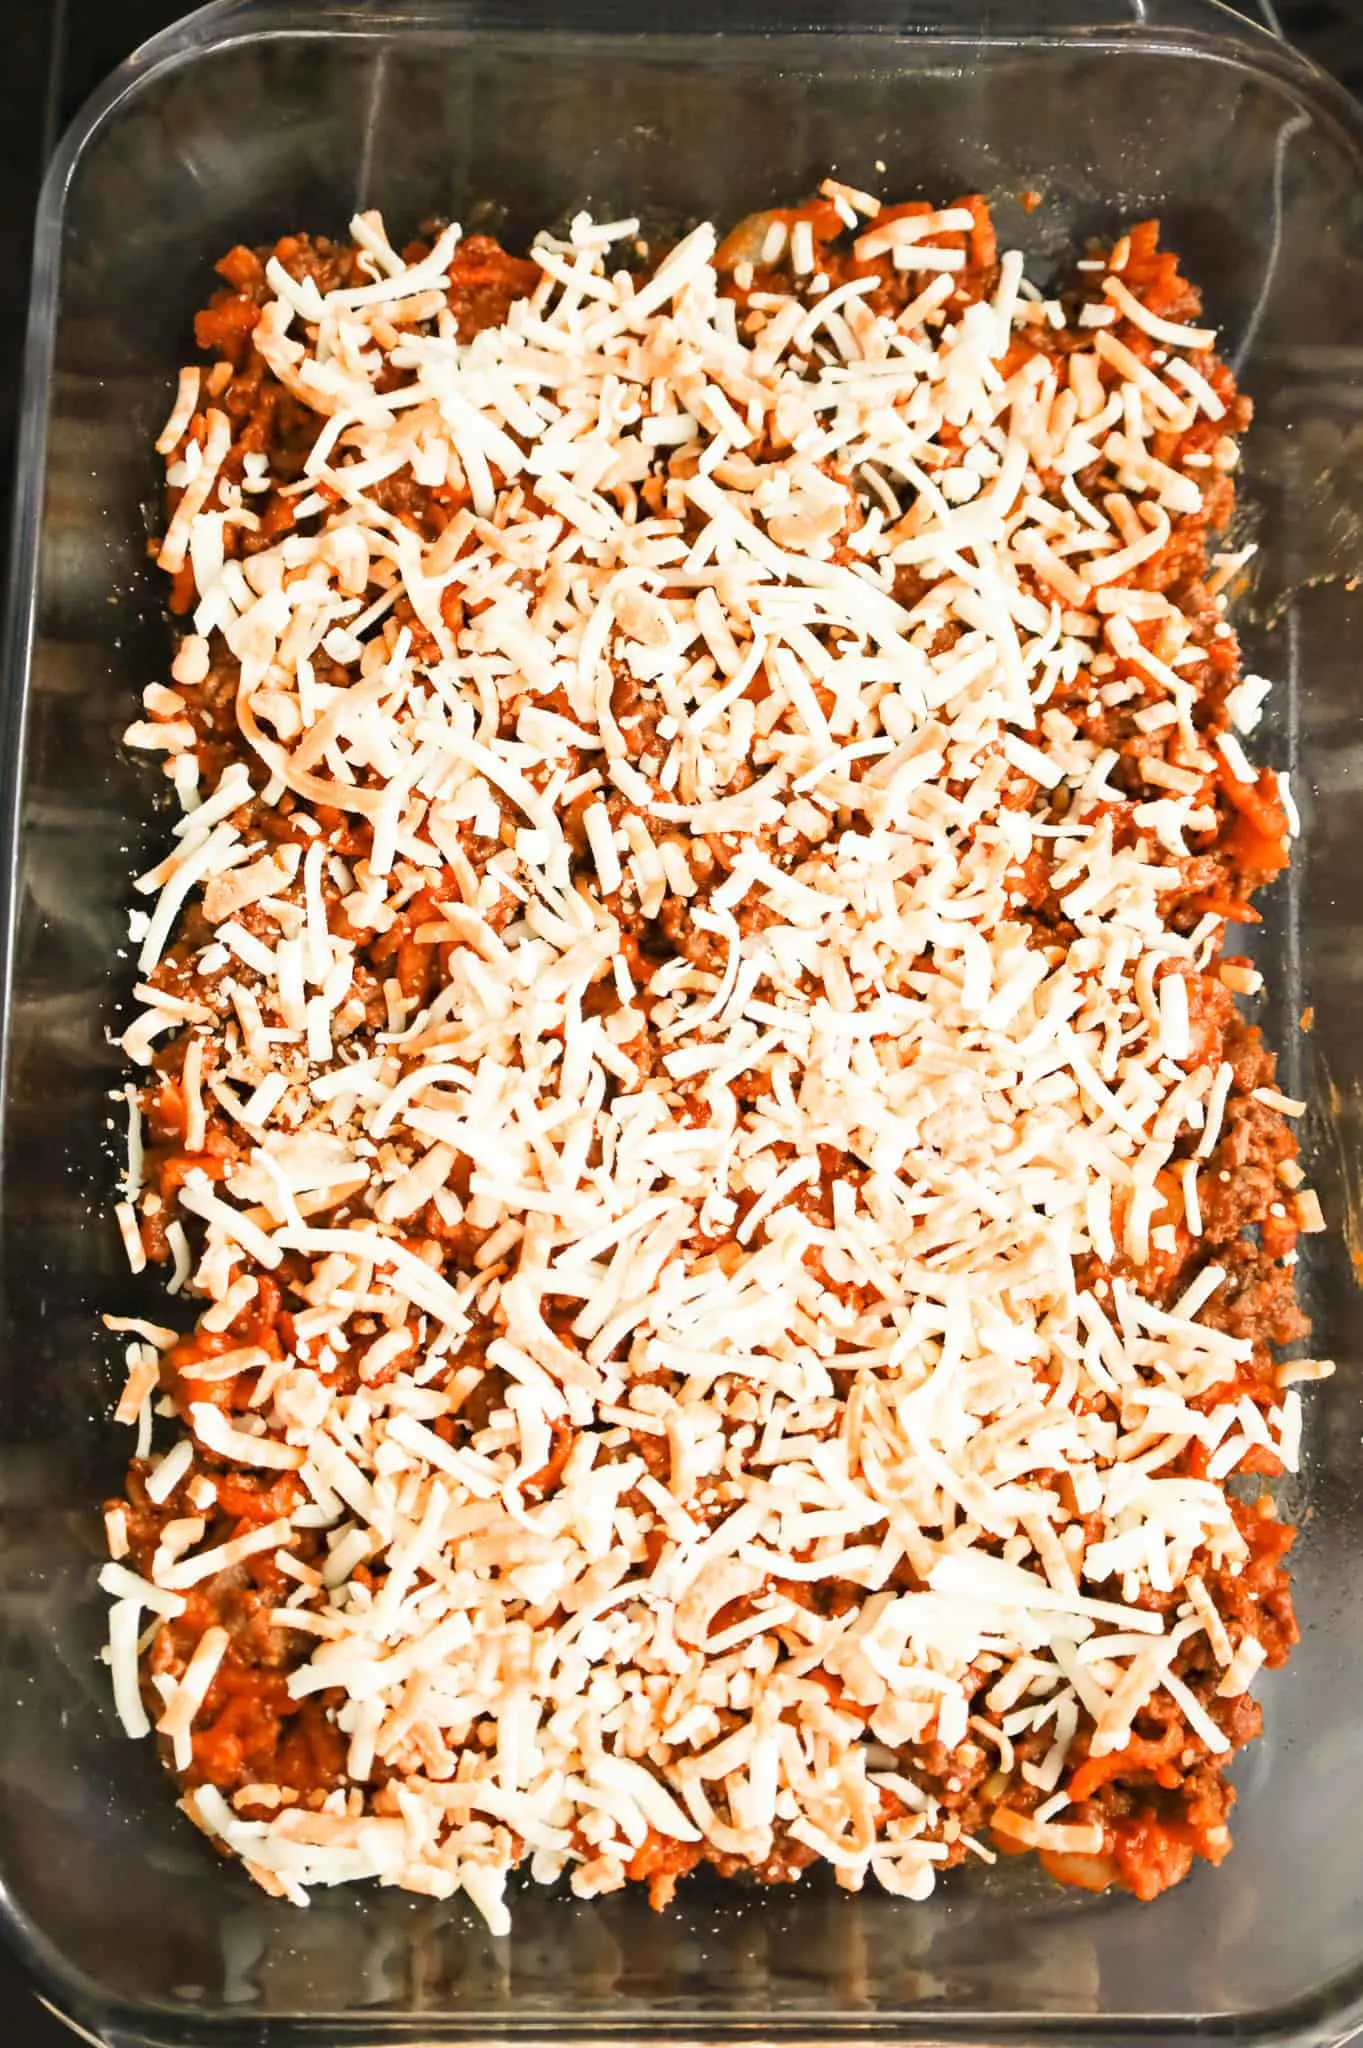 shredded cheese on top of ground beef sloppy joe mixture in a baking dish